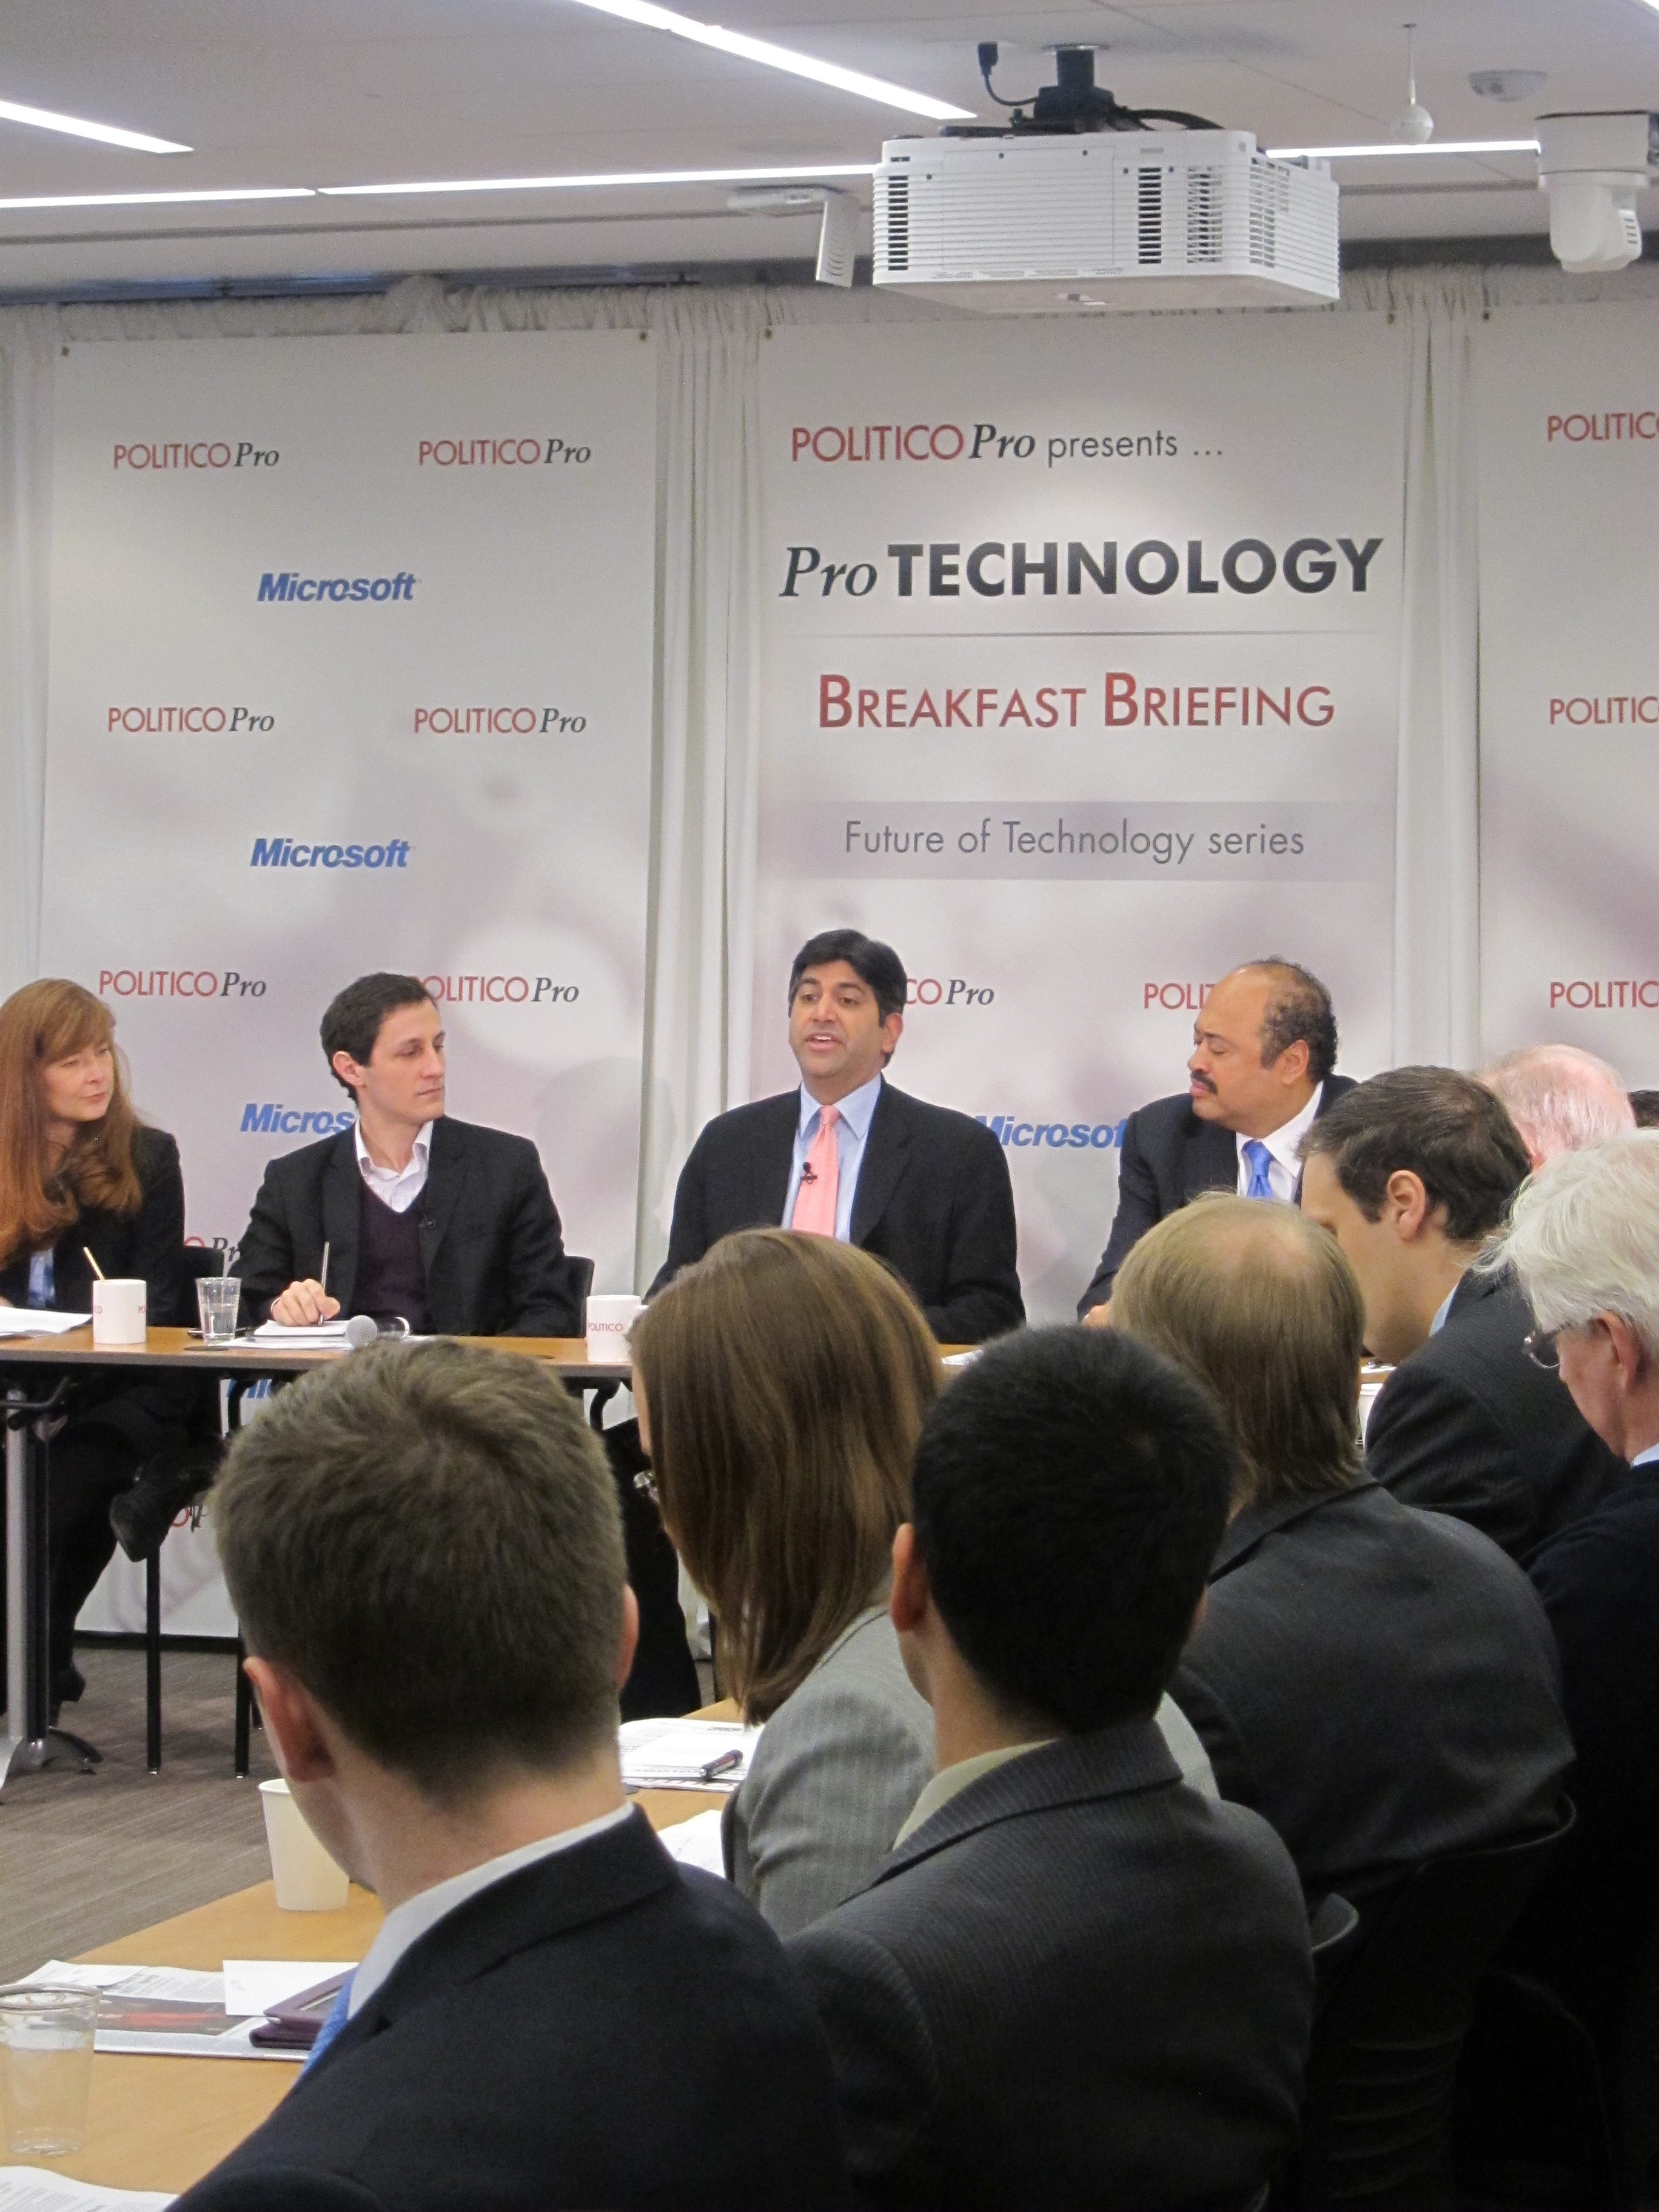 White House CTO Aneesh Chopra (second from right) answers a question at today's Politico briefing hosted by Microsoft.